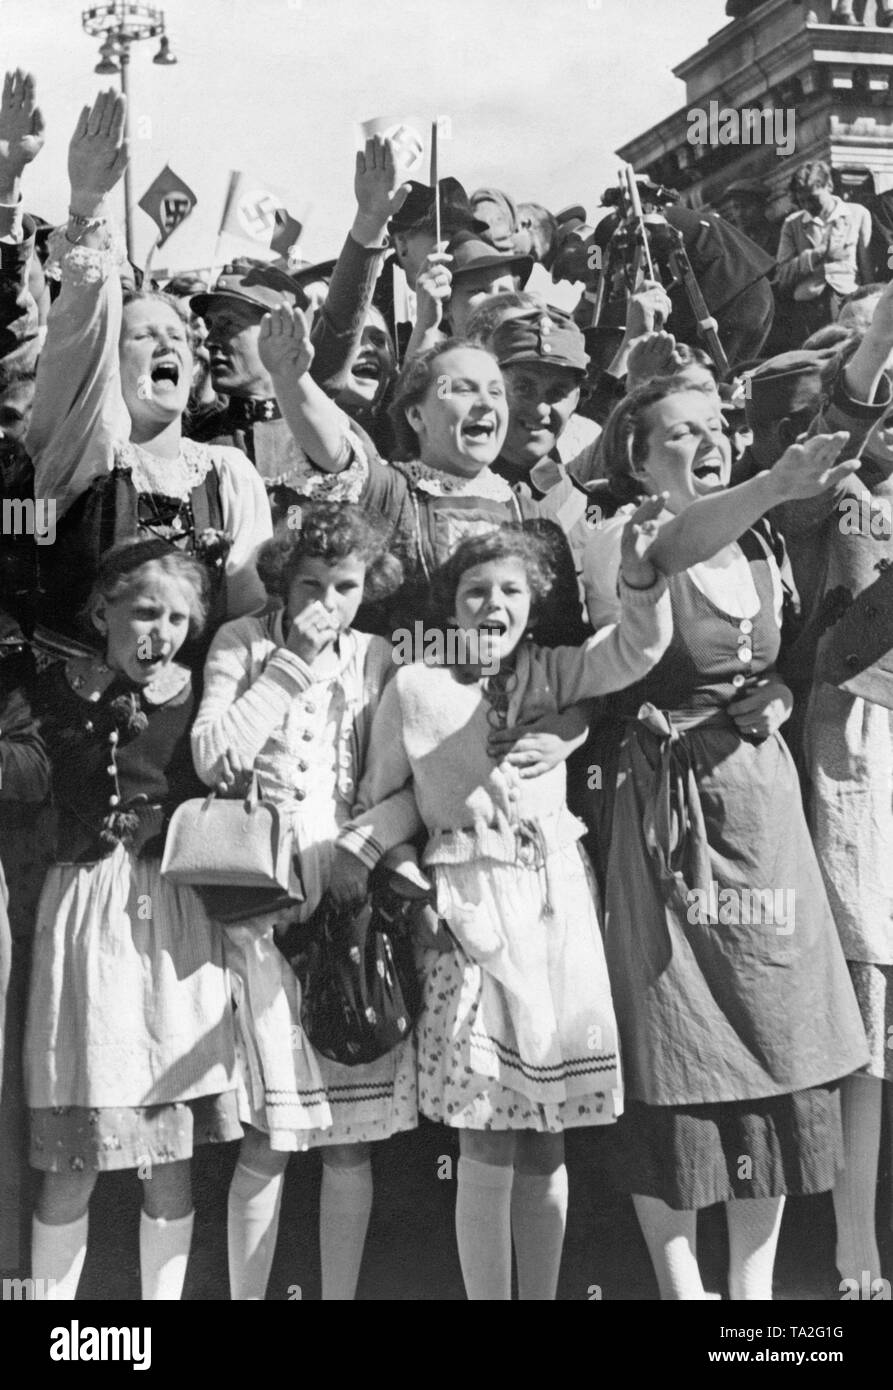 Nazi leader Adolf Hitler visits Klagenfurth, the provincial capital of Carinthia. Girls and young women cheer him. Stock Photo